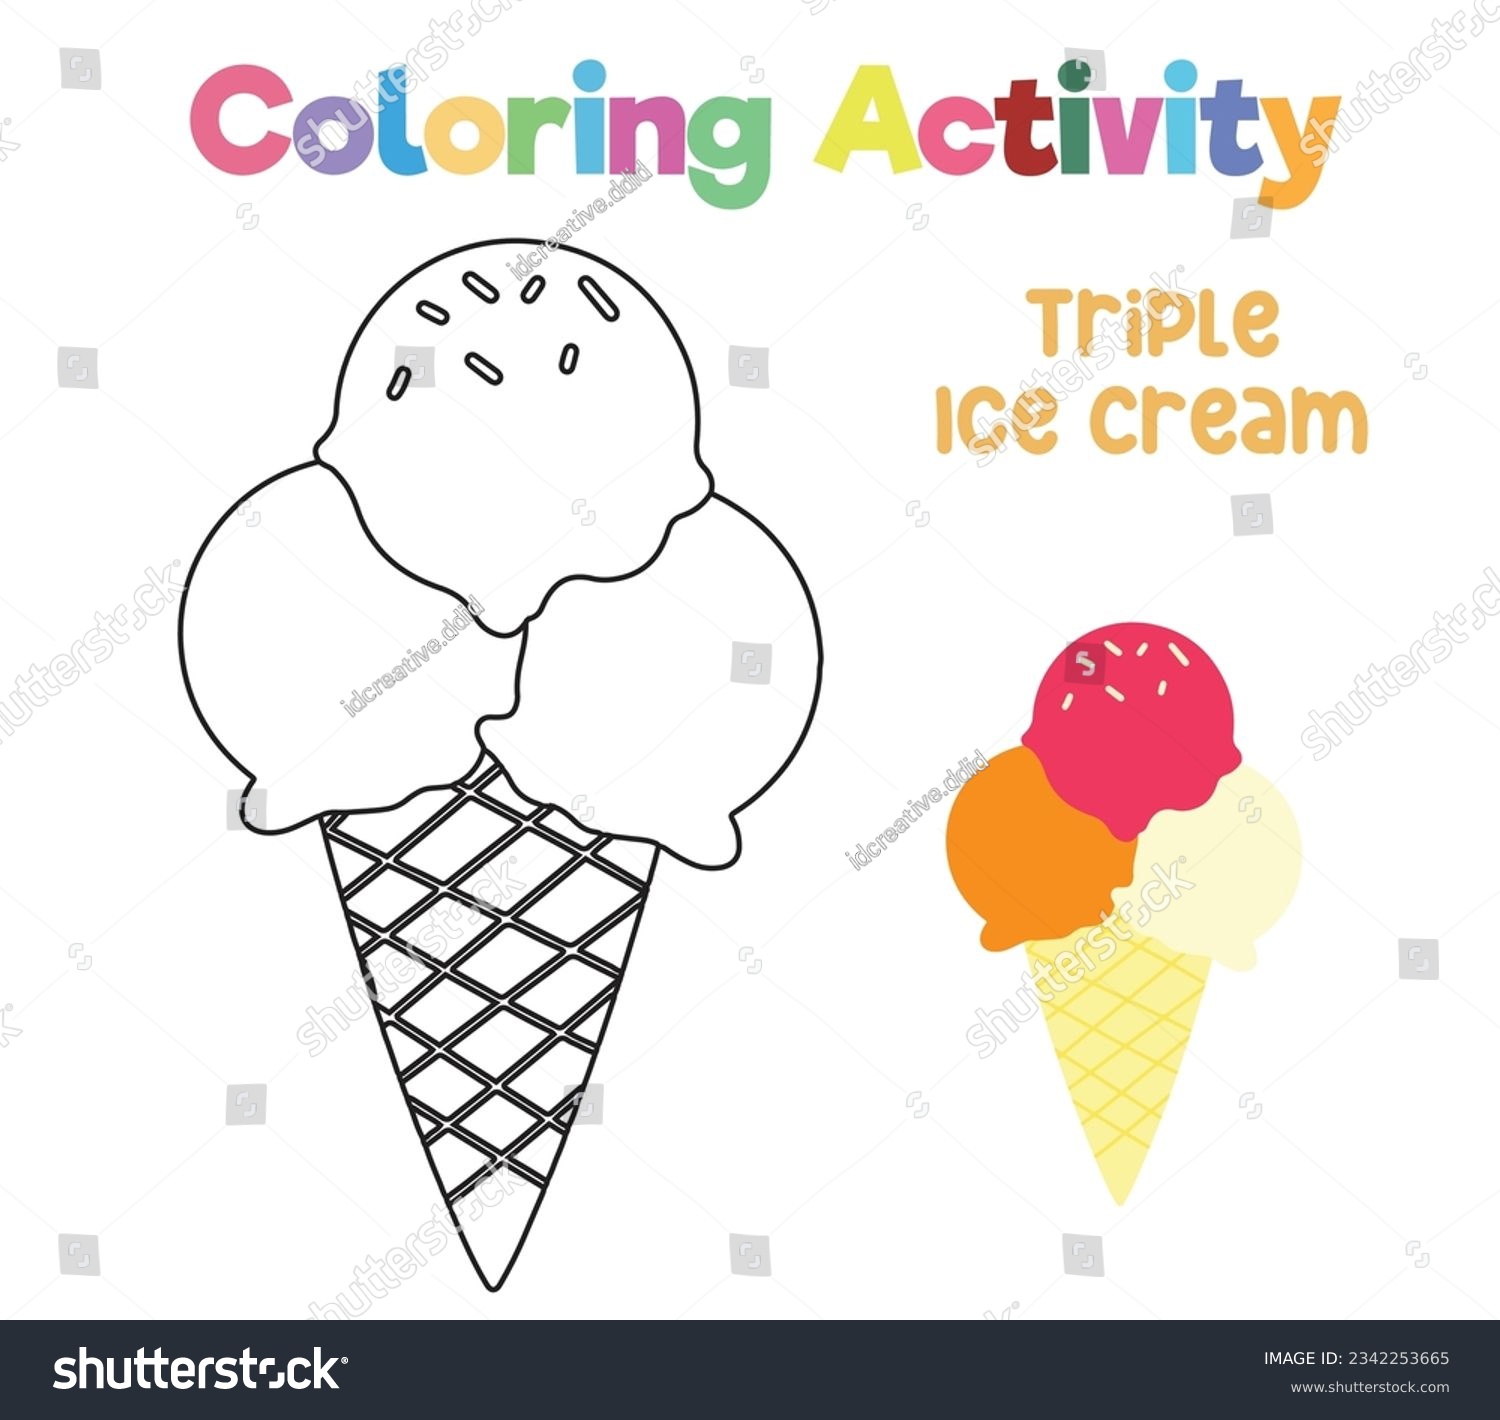 Easy coloring page kids coloring activity stock vector royalty free